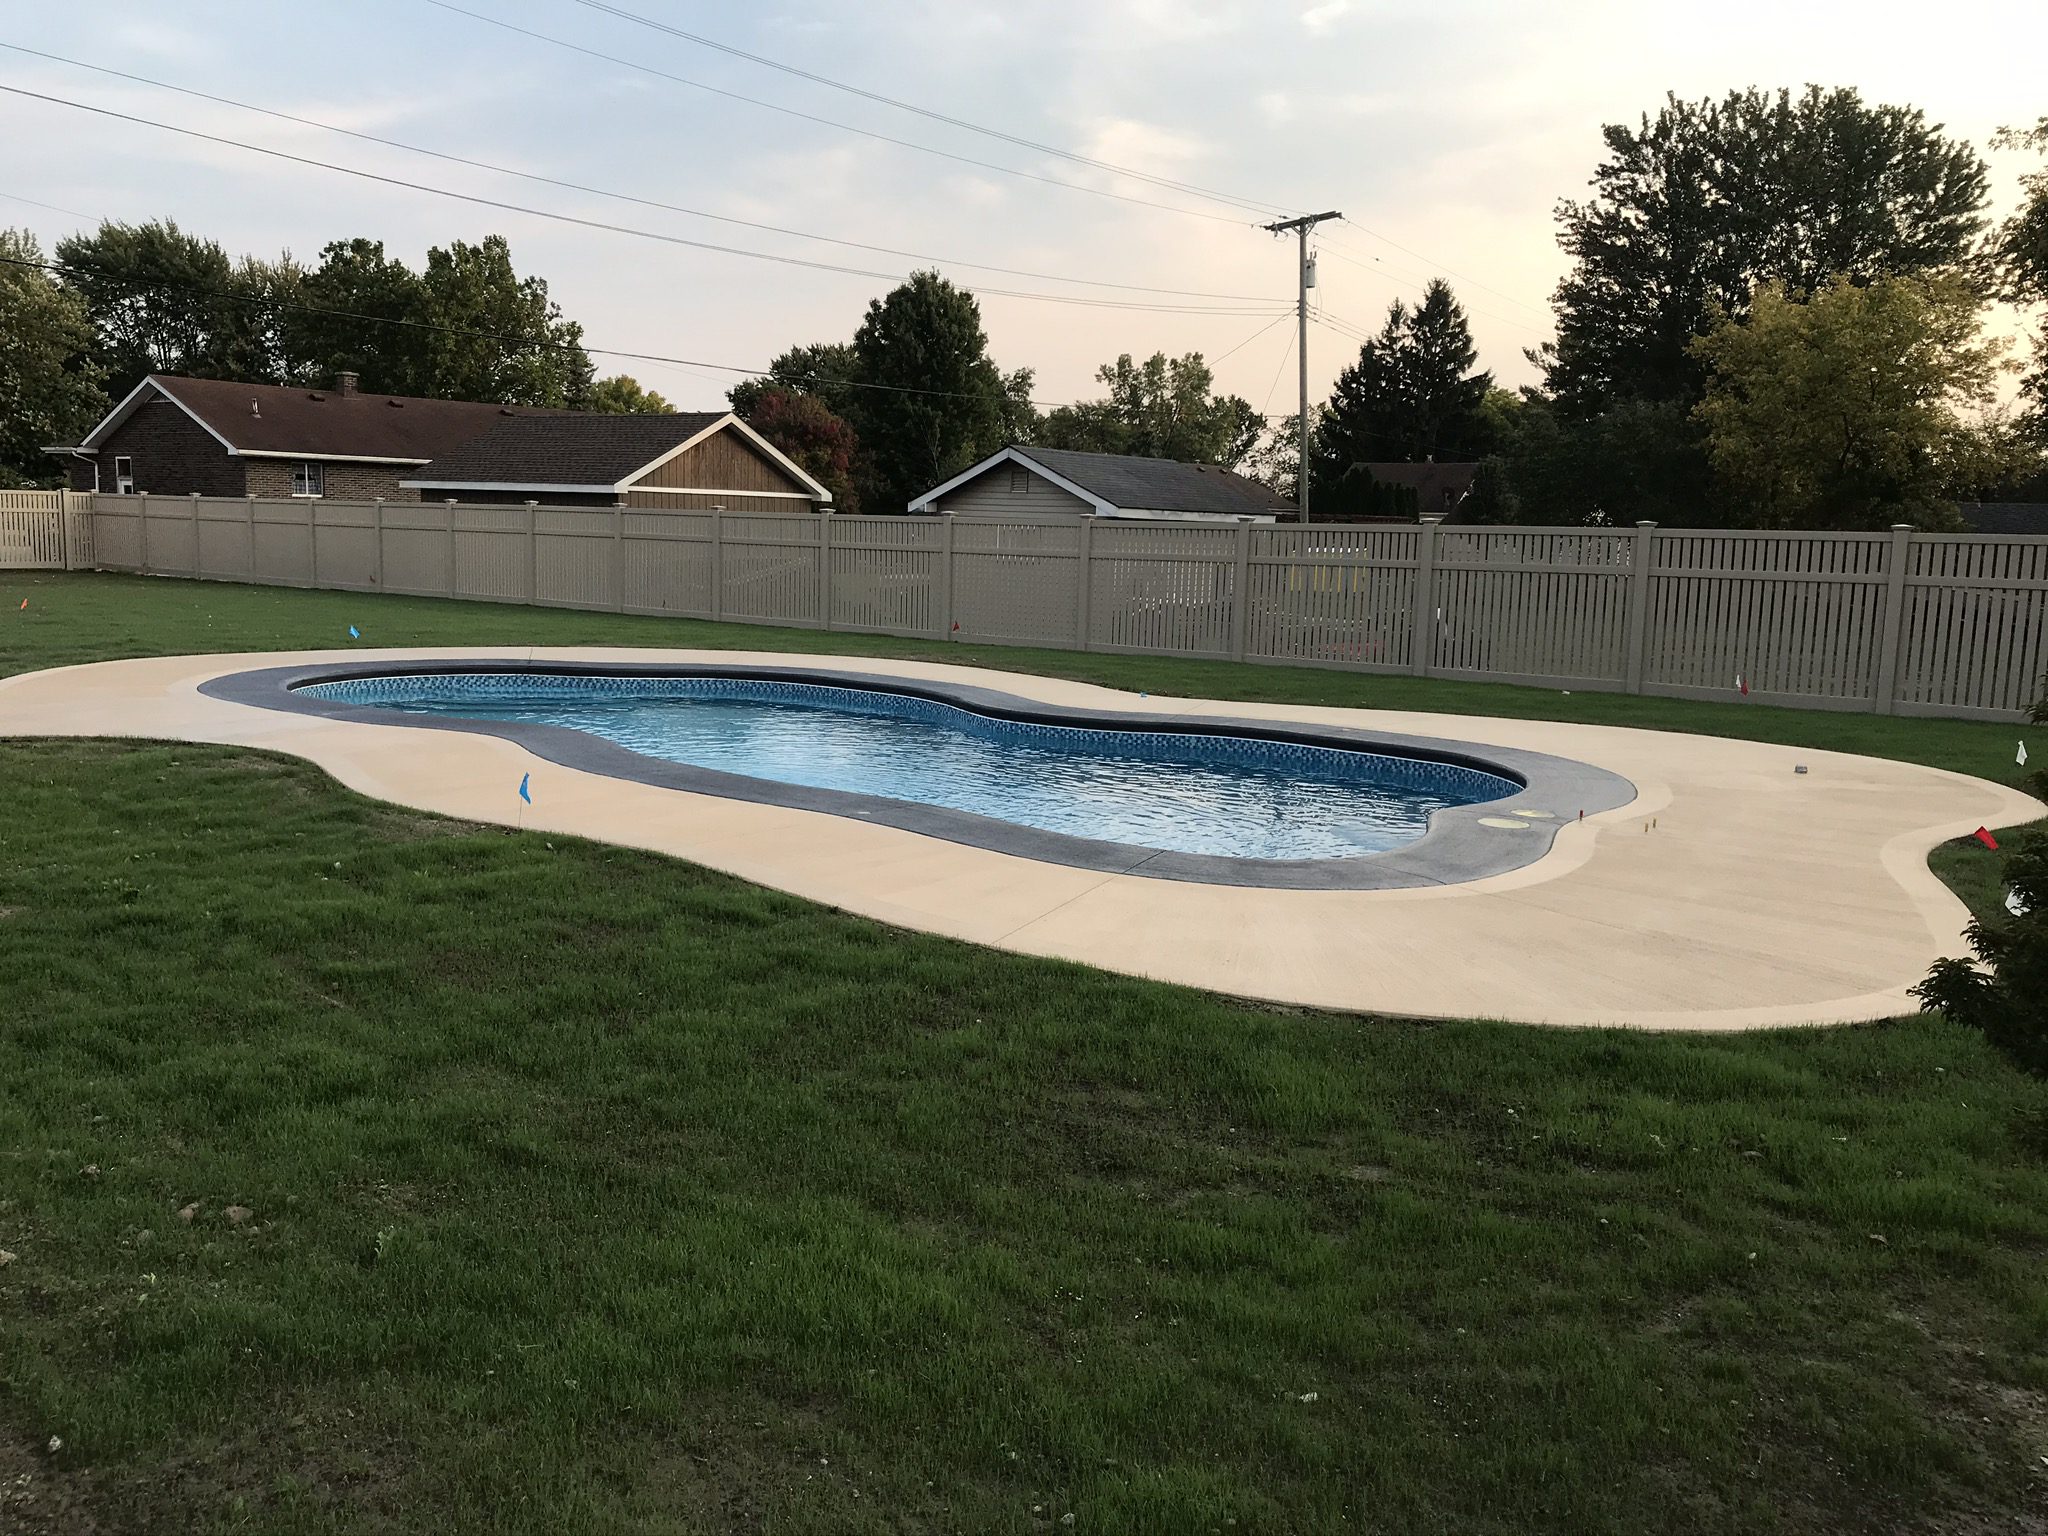 Refinished concrete pool deck